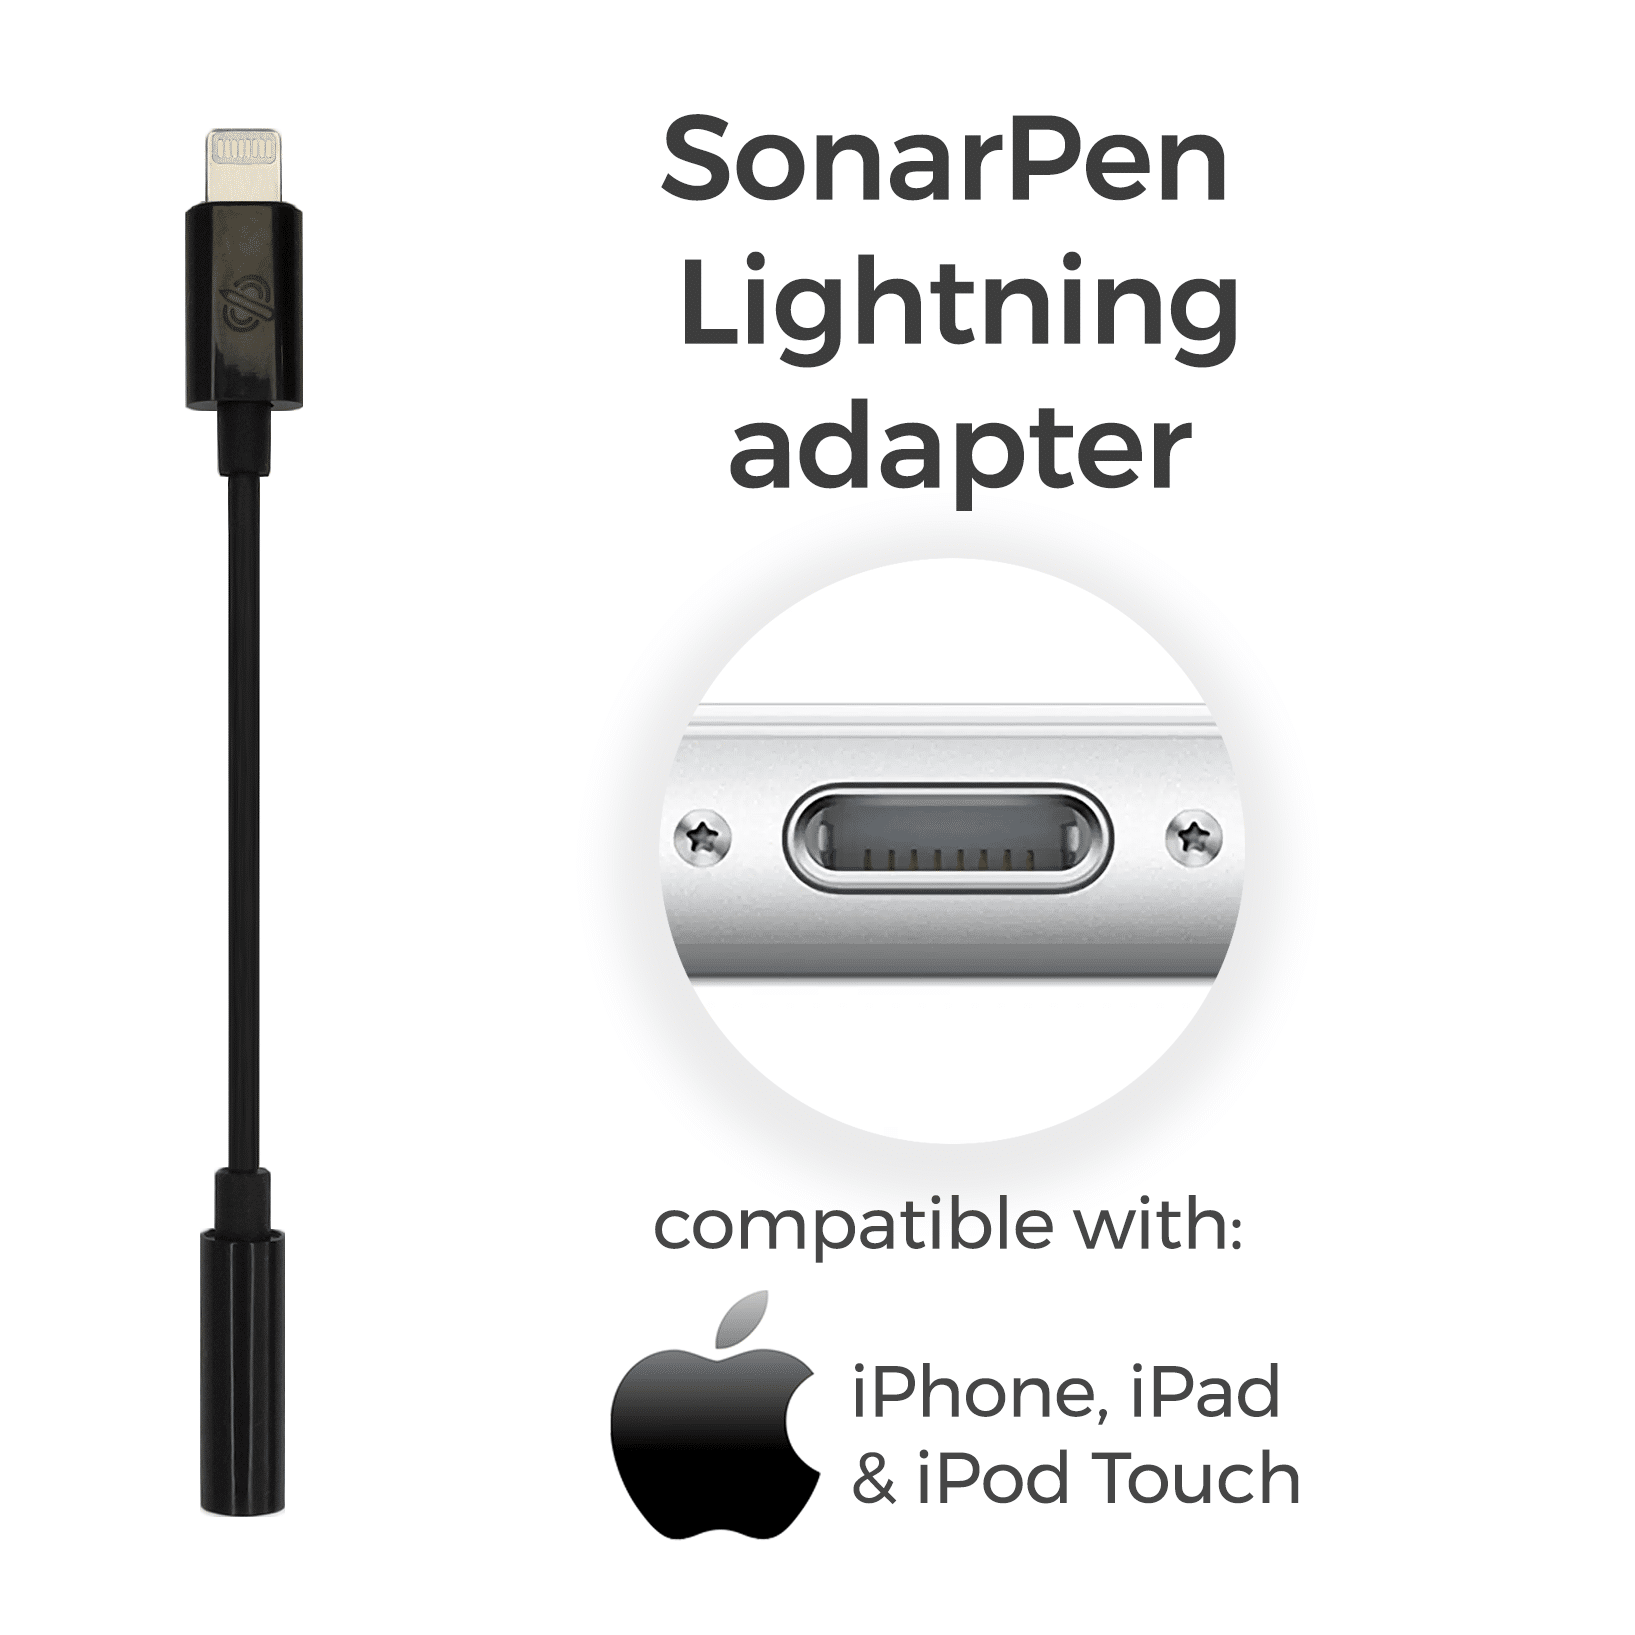 SonarPen Lightning adapter turns iOS devices into powerful drawing pad